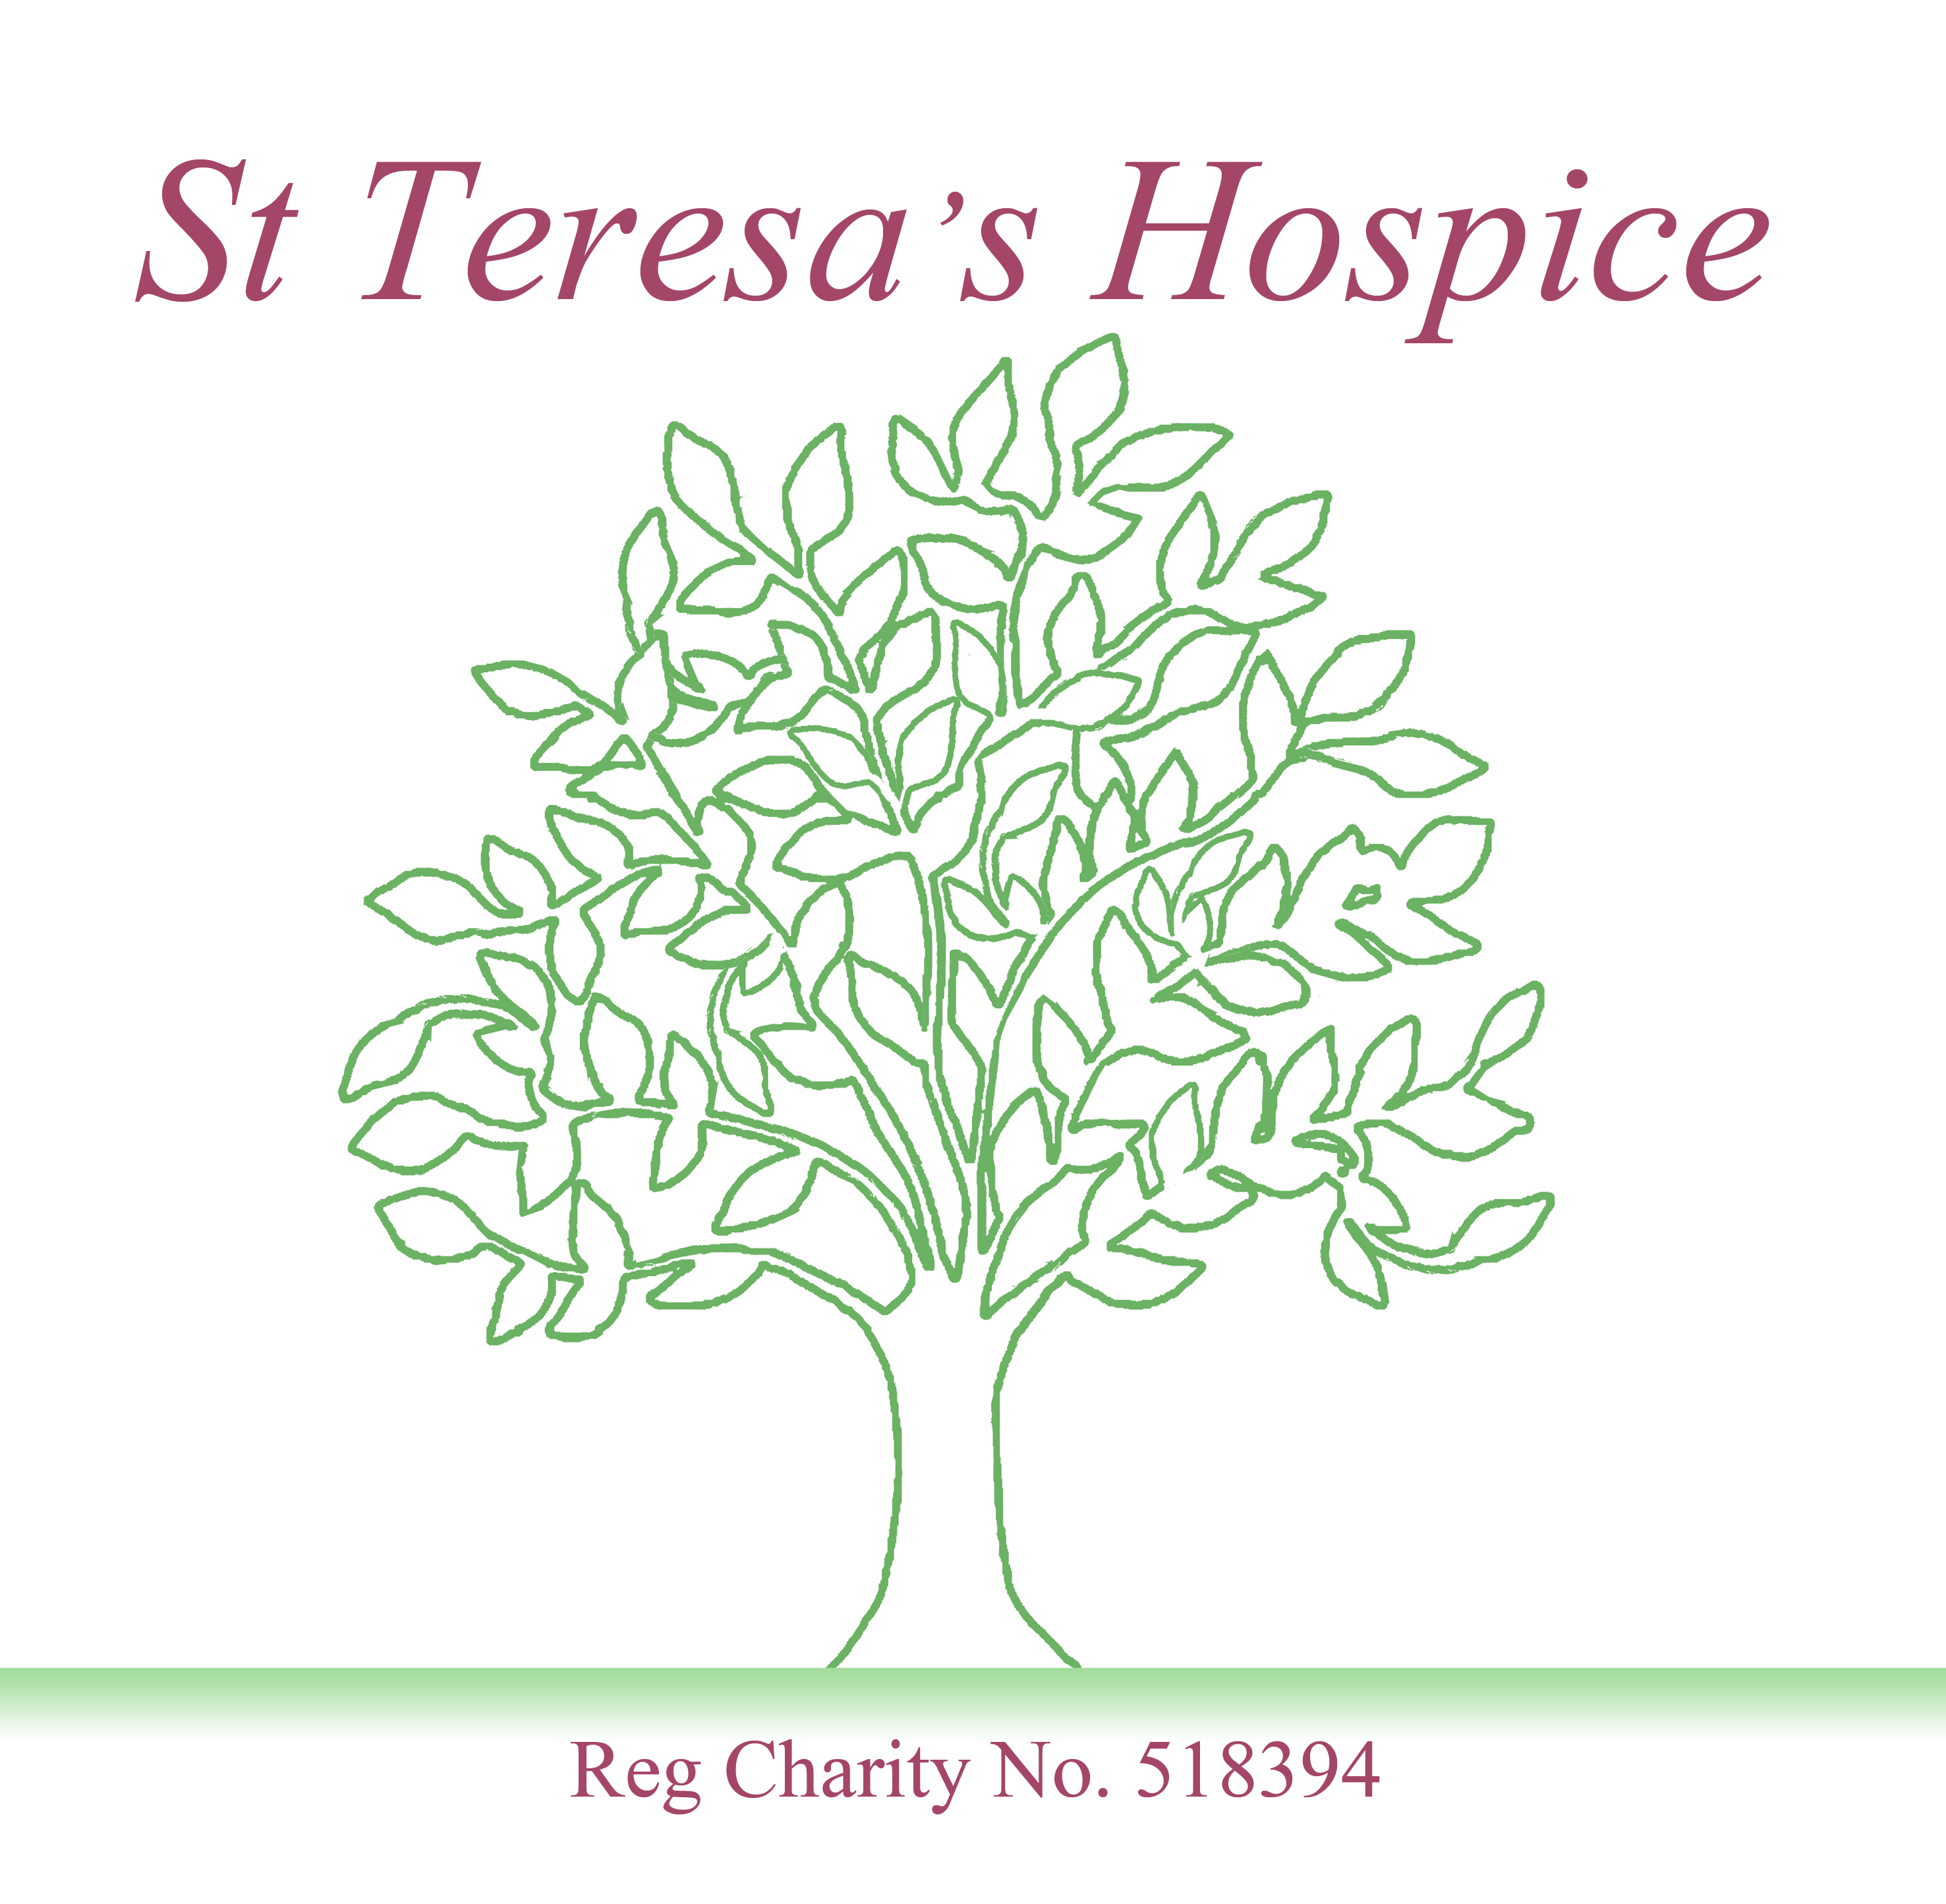 Our continuing support of St Teresa's Hospice